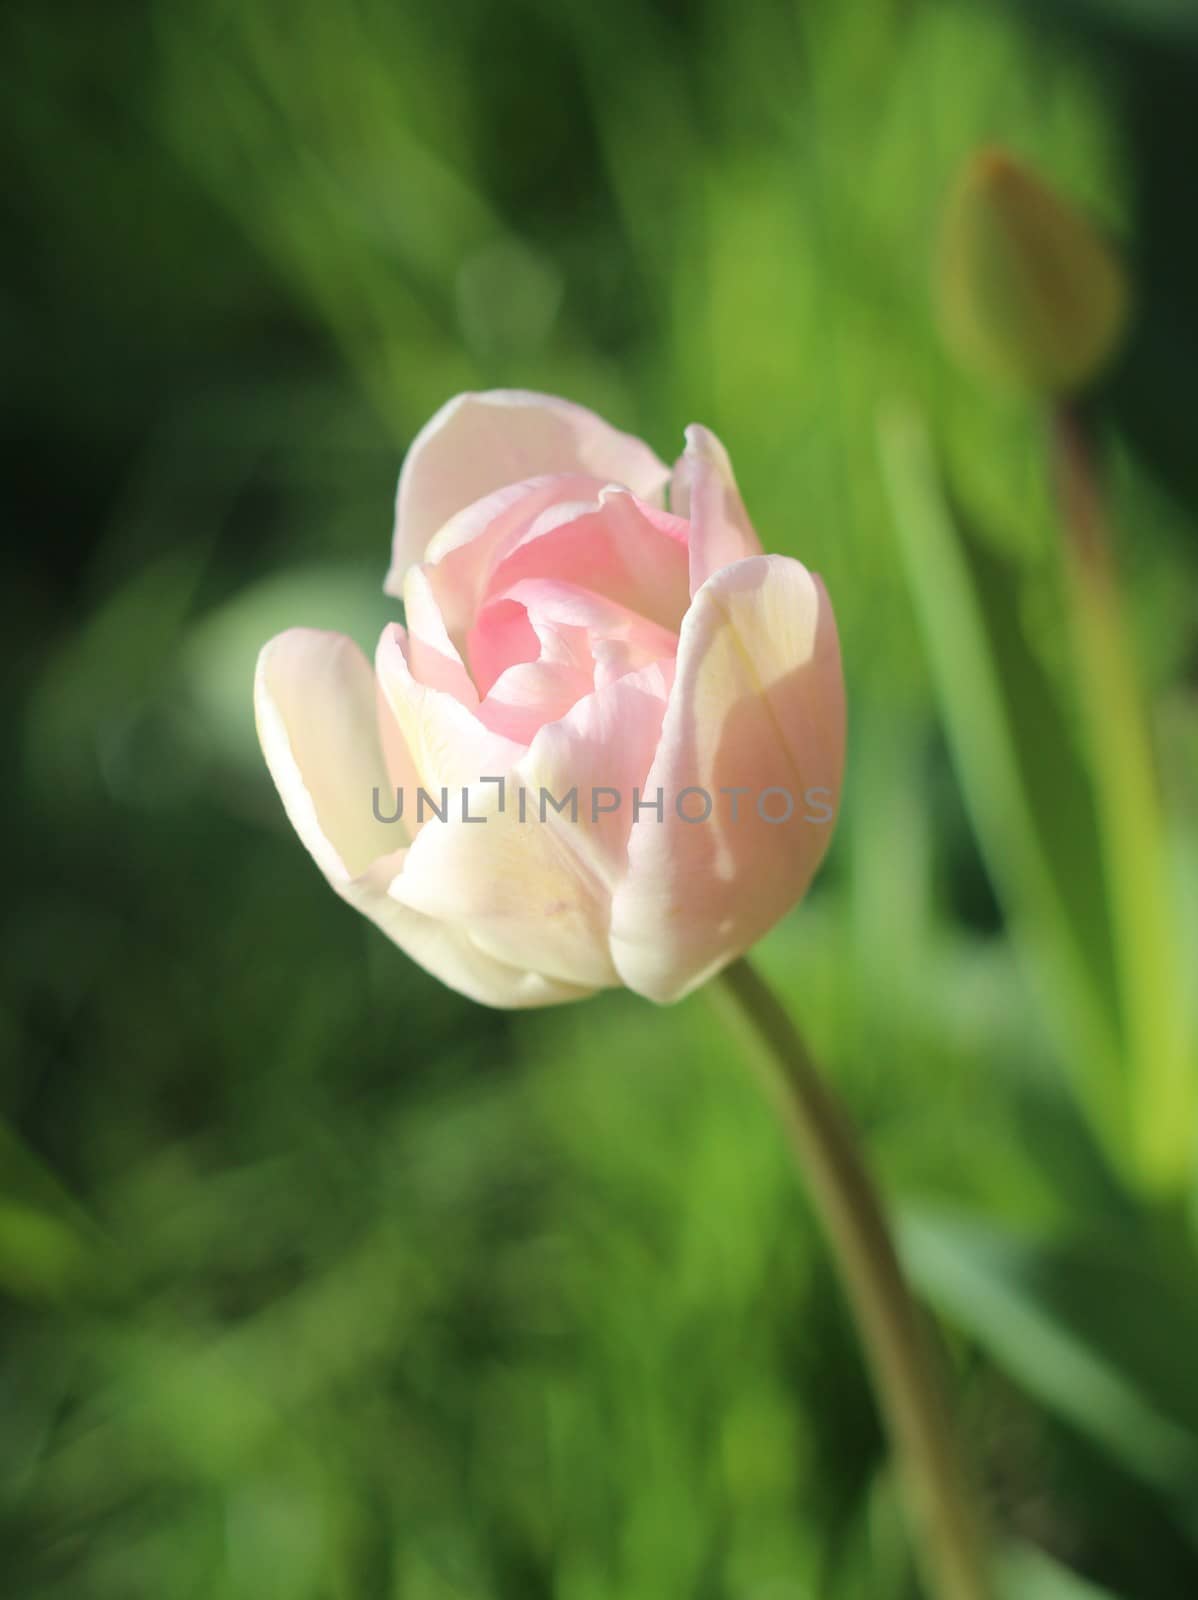 A isoled pink tulip, with green background.